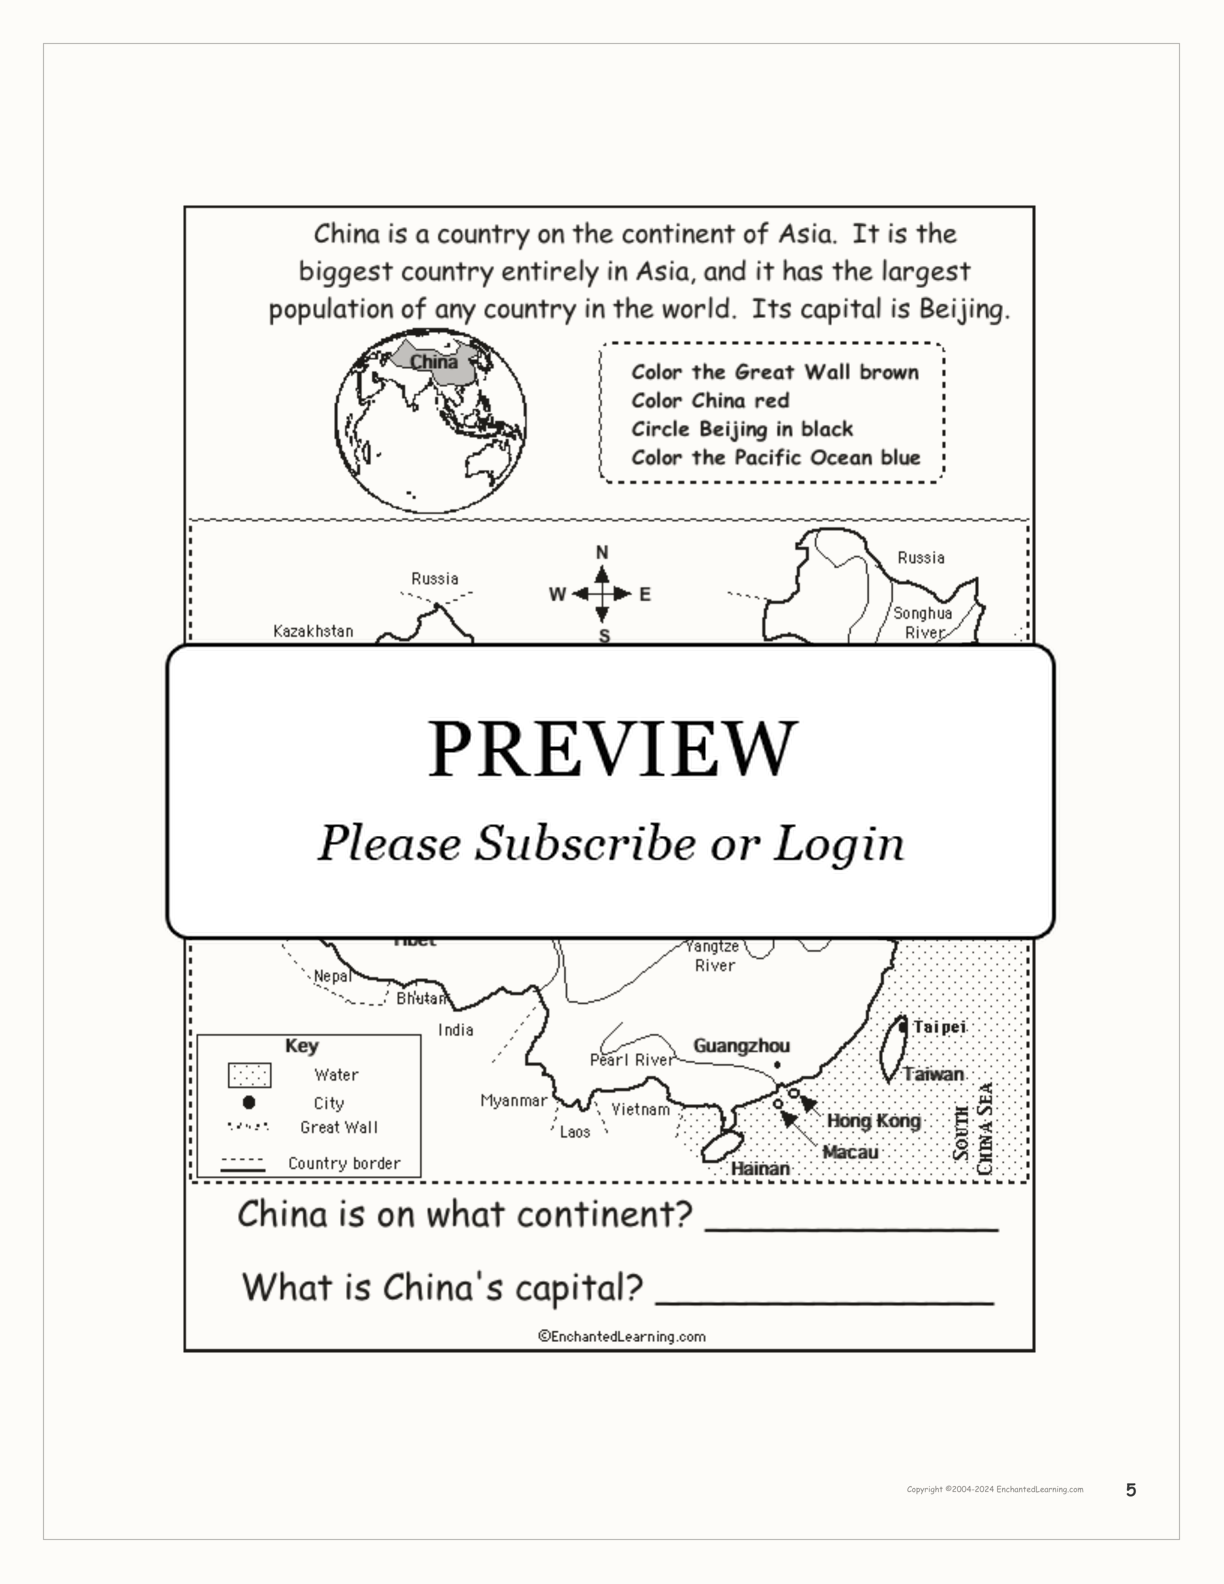 Chinese New Year Activity Book interactive printout page 5